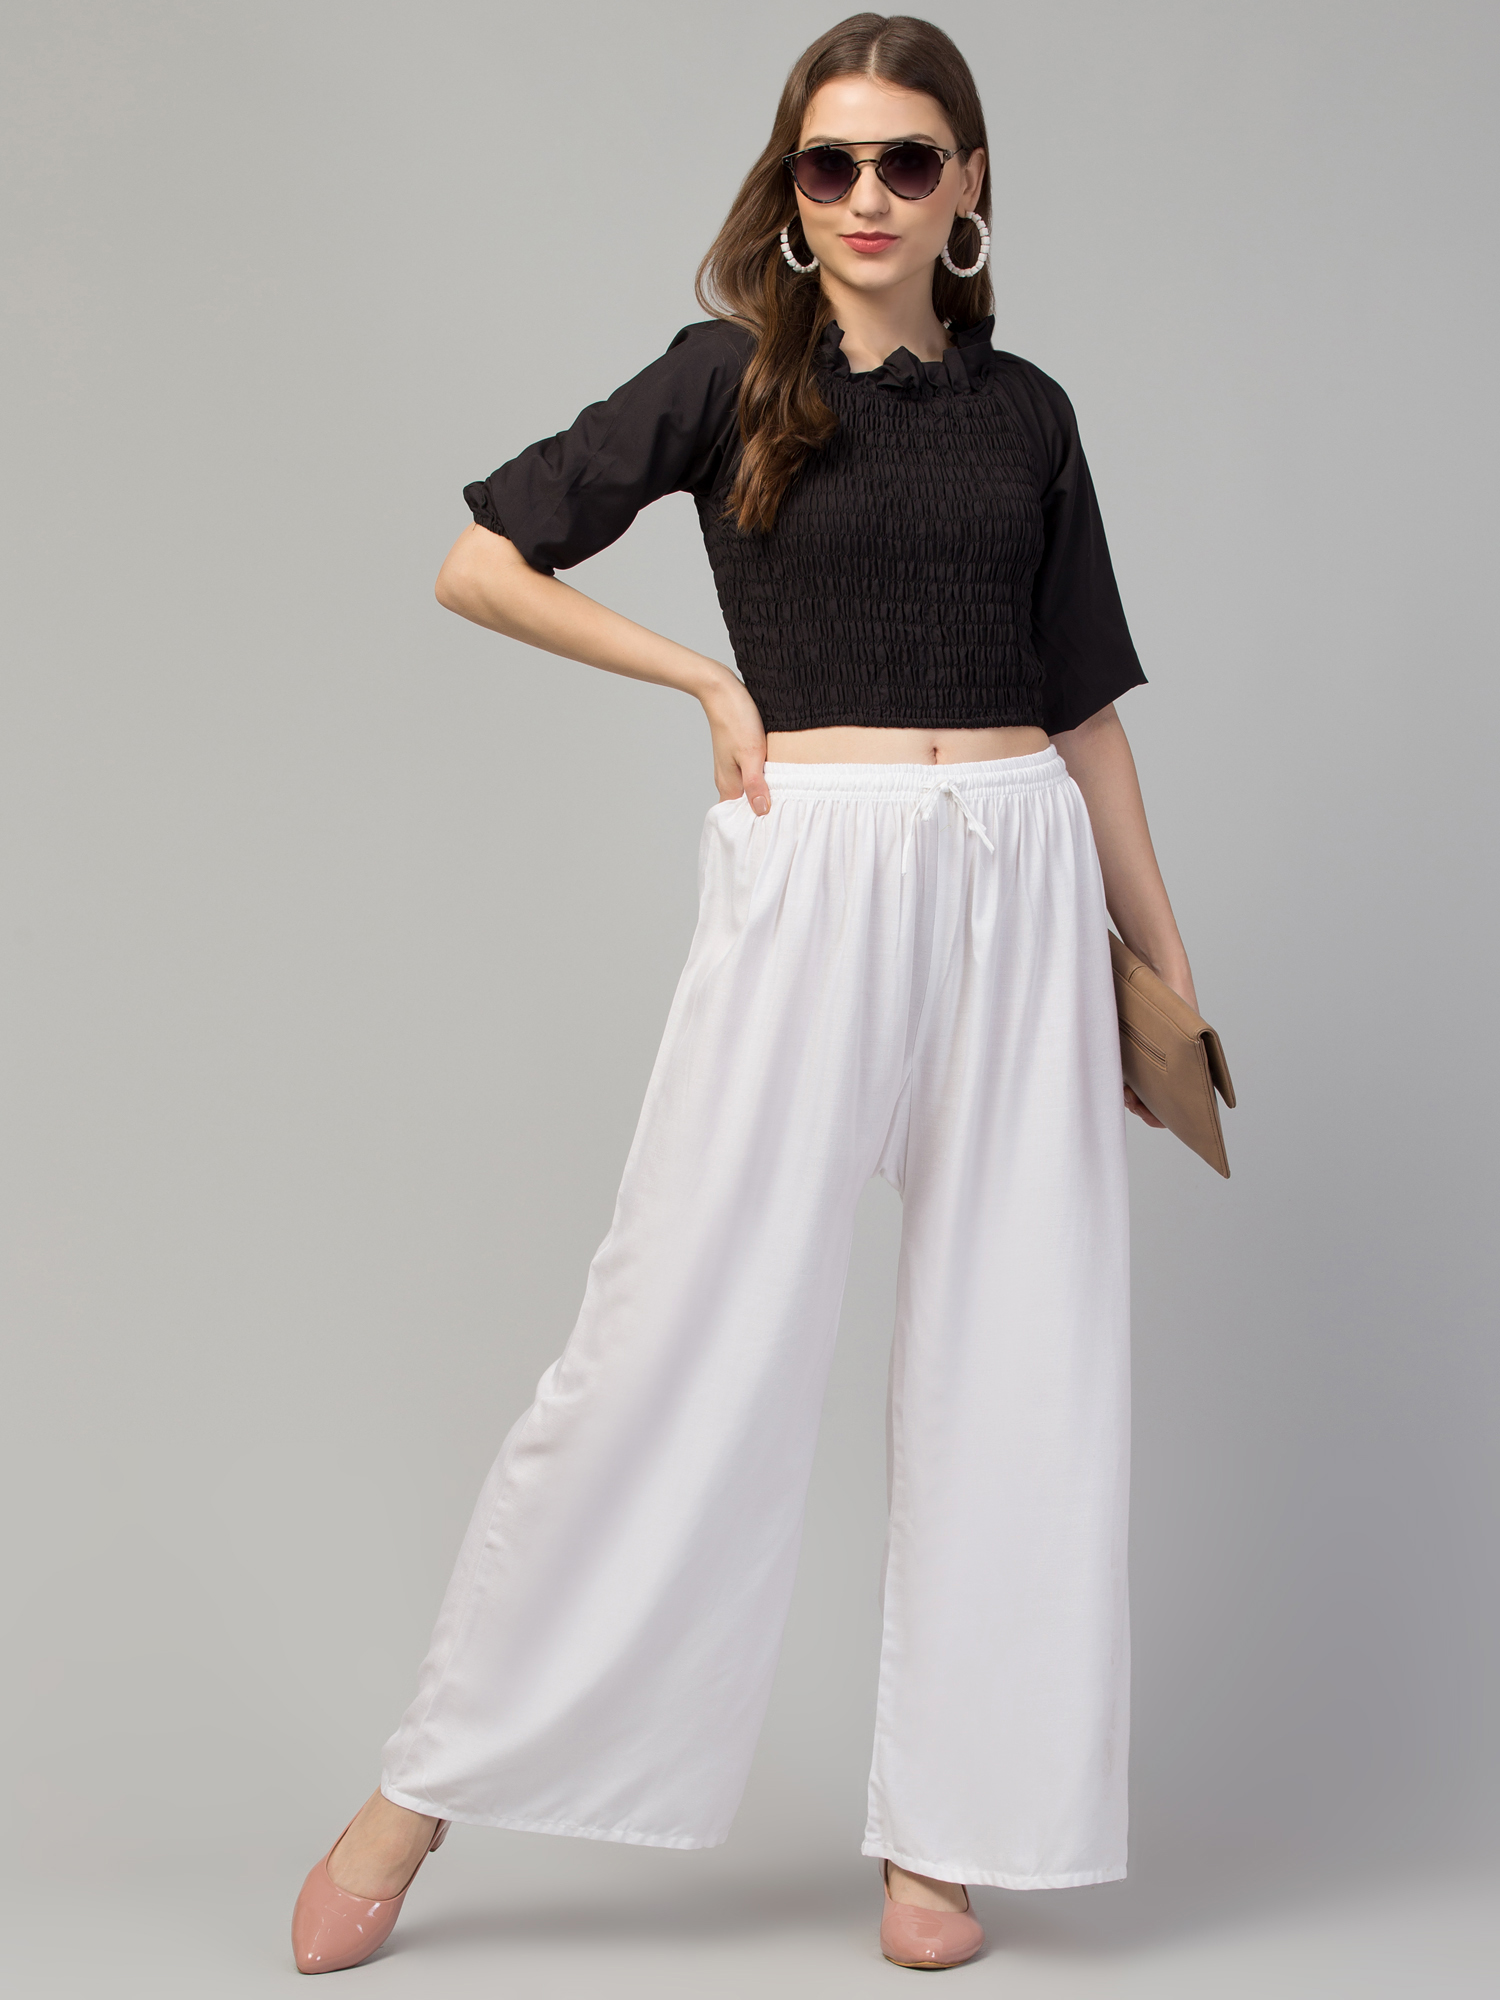 fcity.in - Trendy Palazzo Pant With Pocket For Womengirl Black Palazzo For